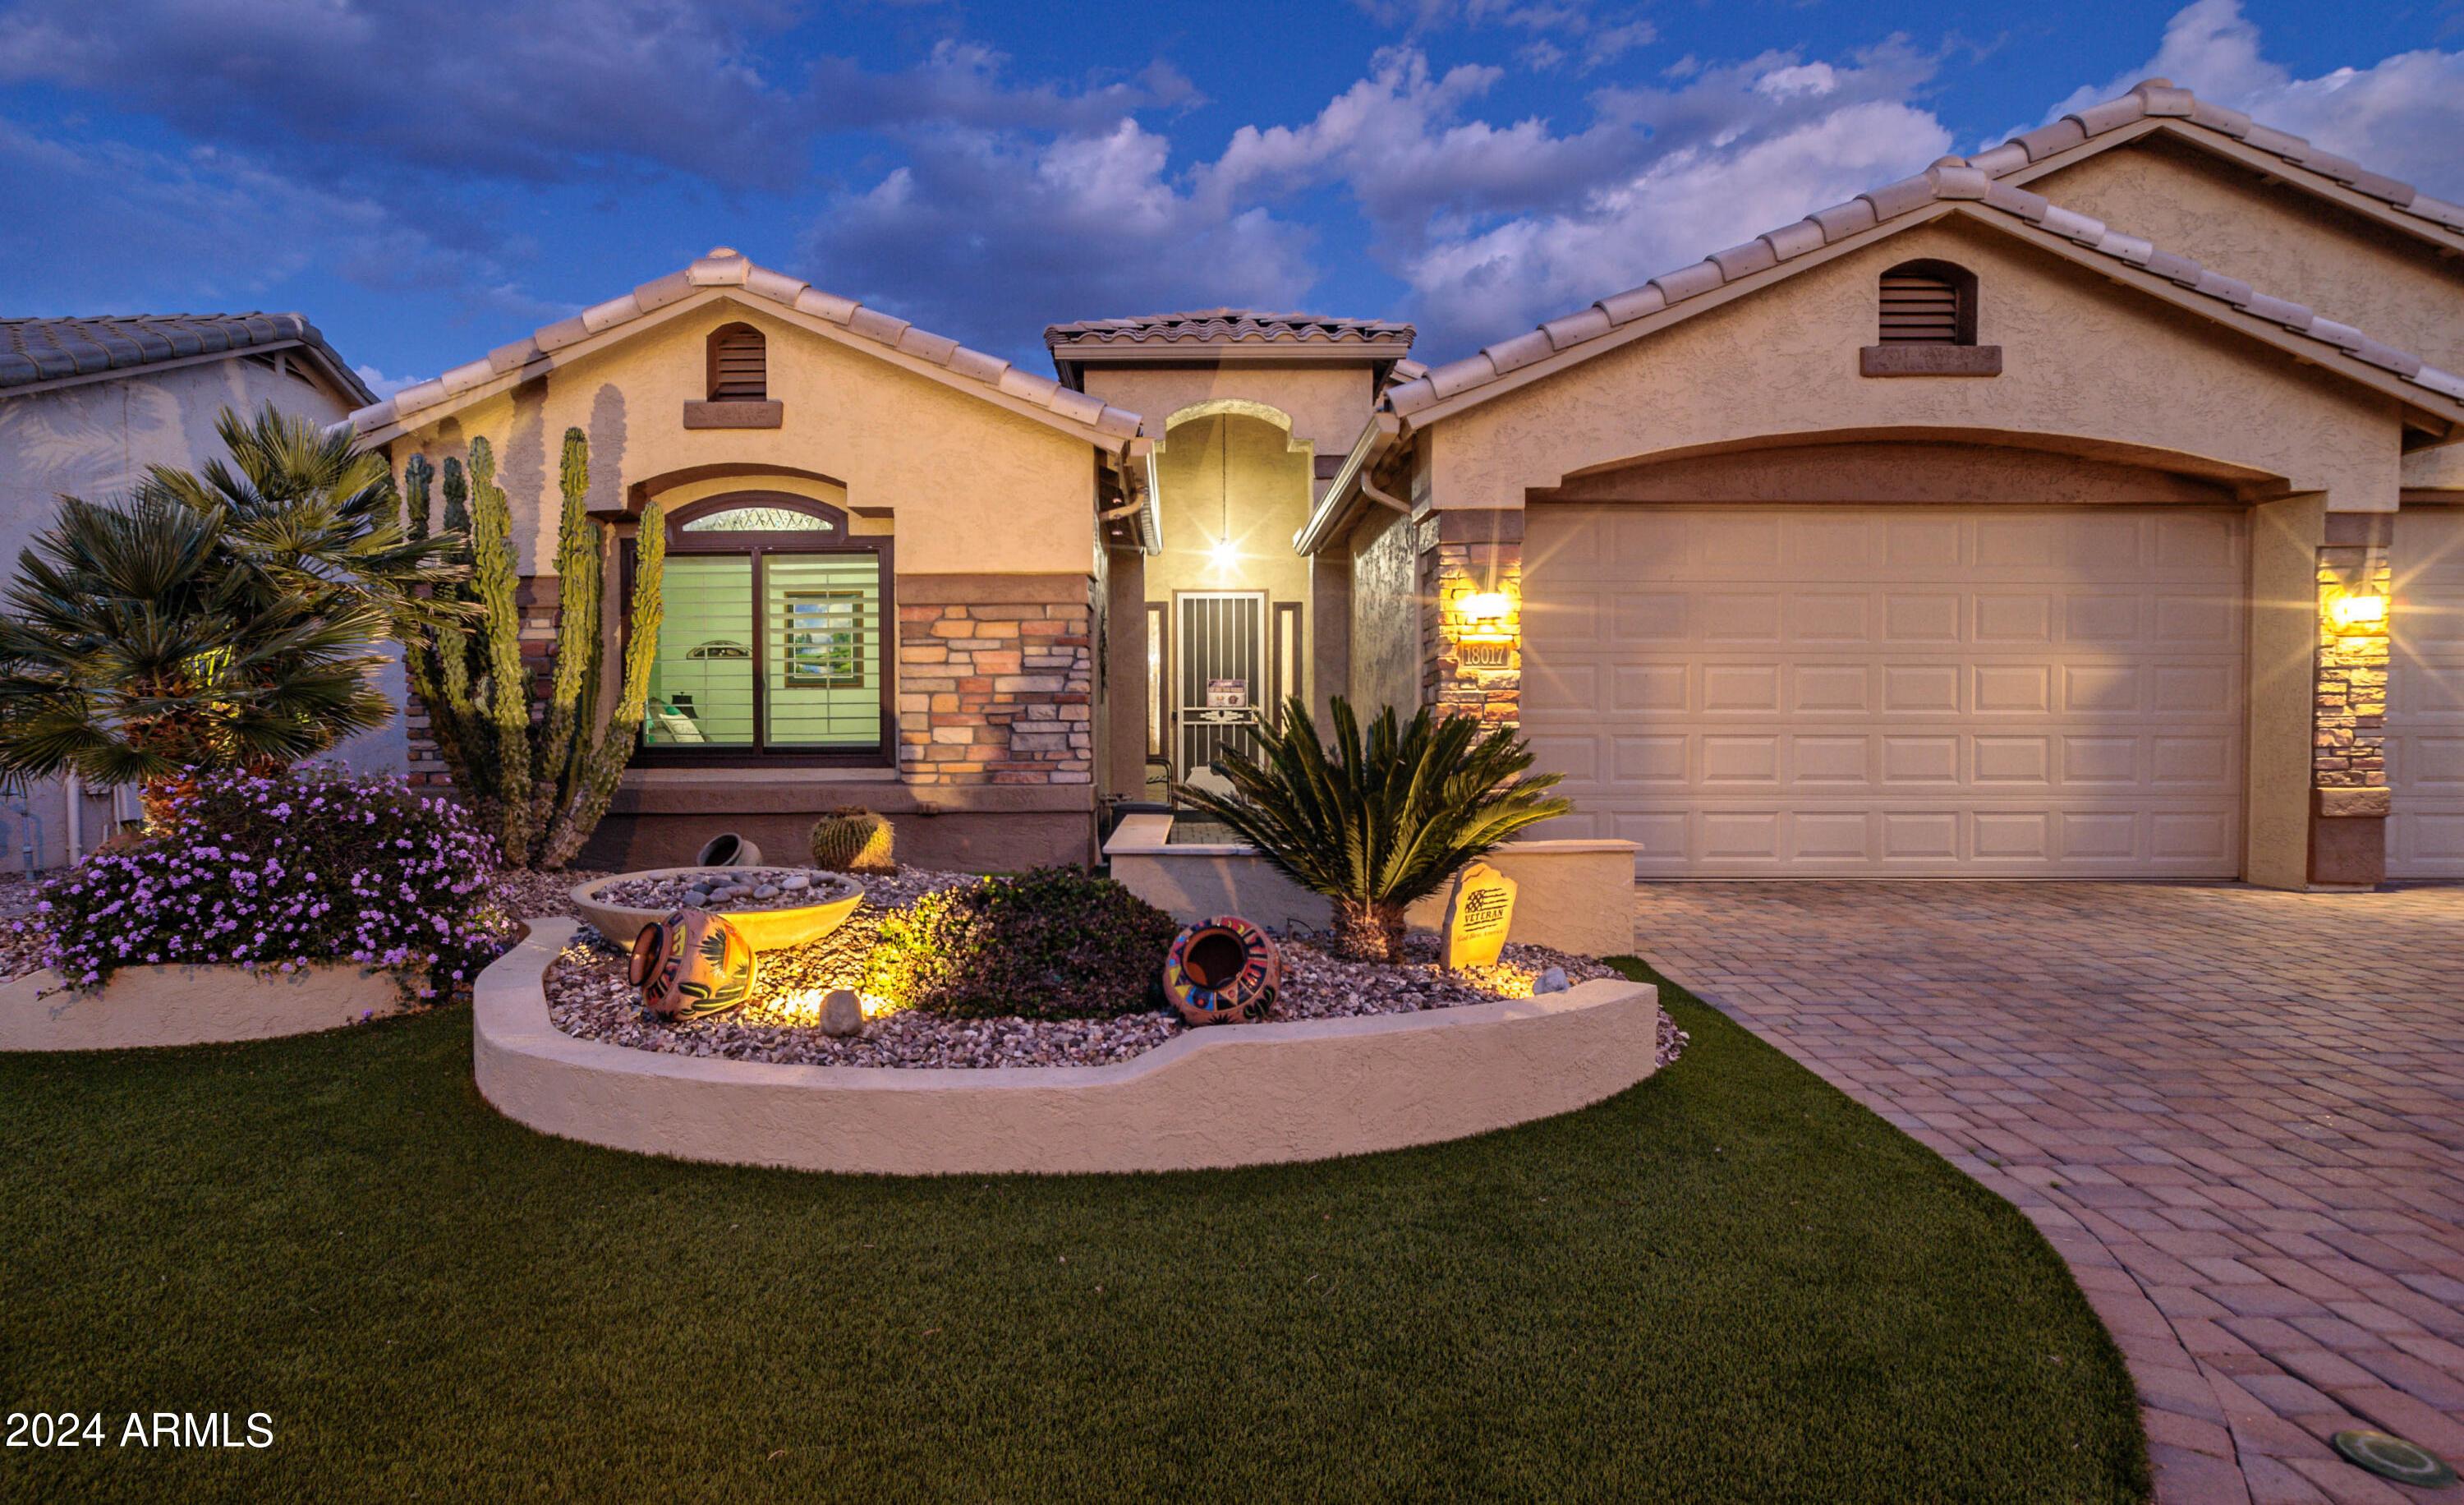 Photo one of 18017 N Windfall Dr Surprise AZ 85374 | MLS 6683230